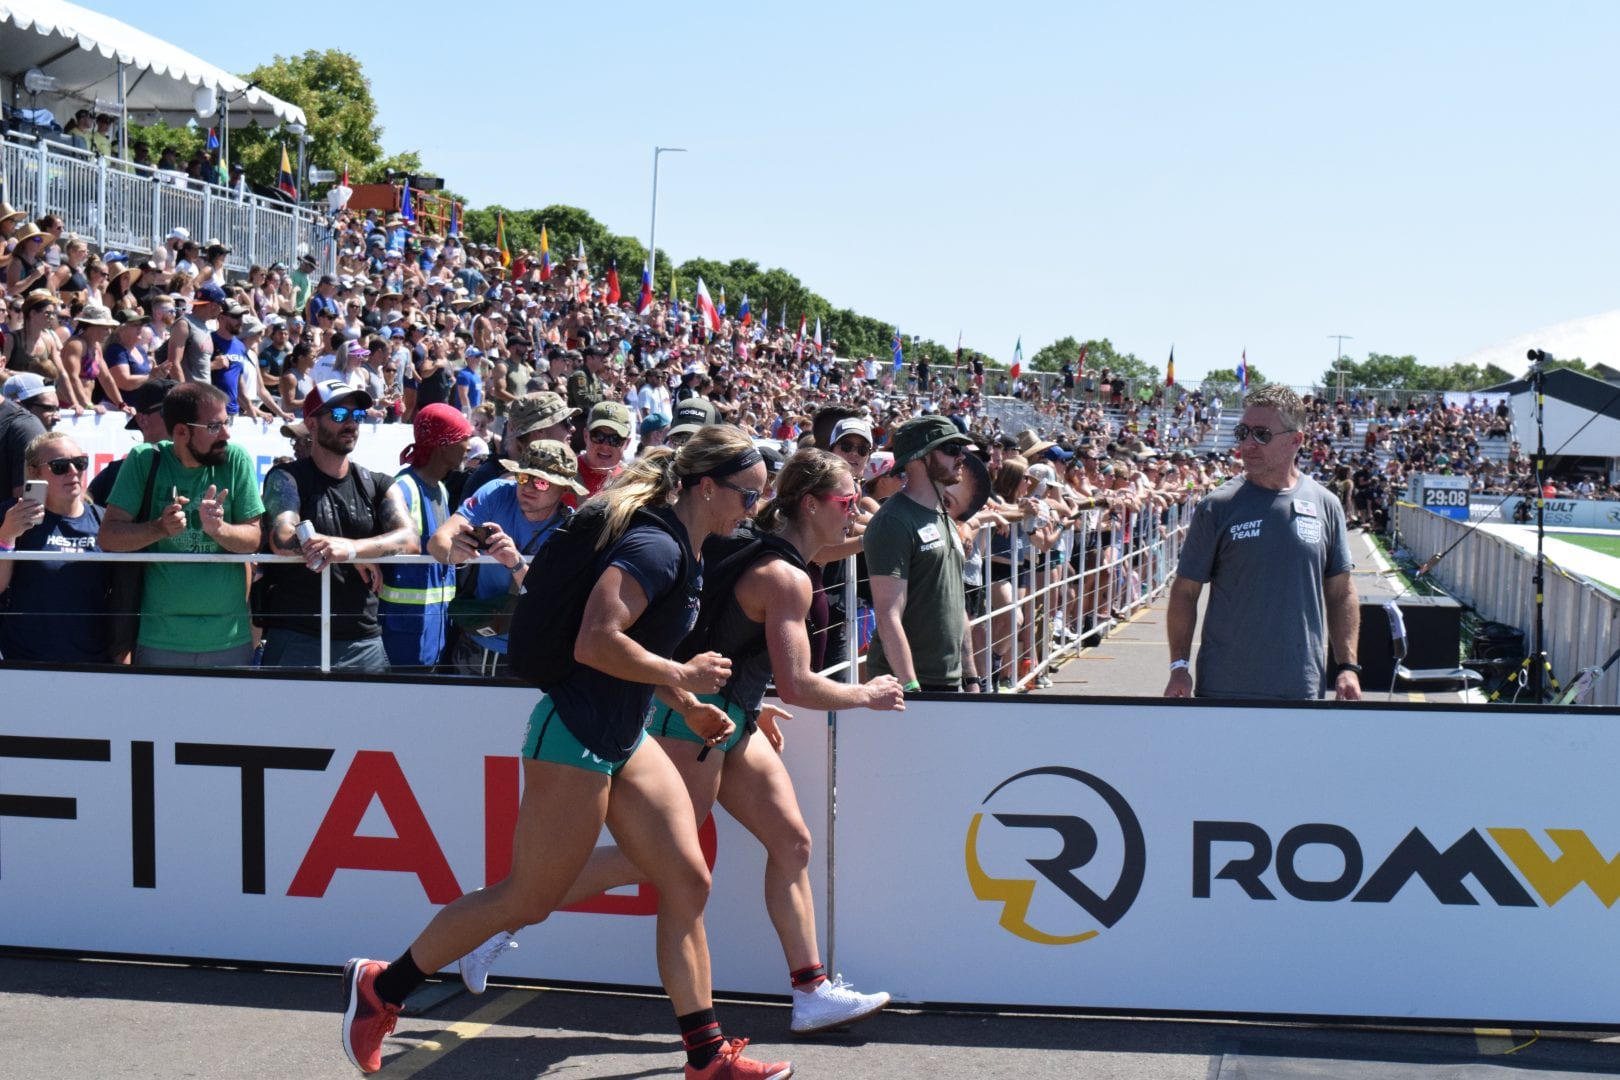 Brooke Wells completes the Ruck Run event at the 2019 CrossFit Games